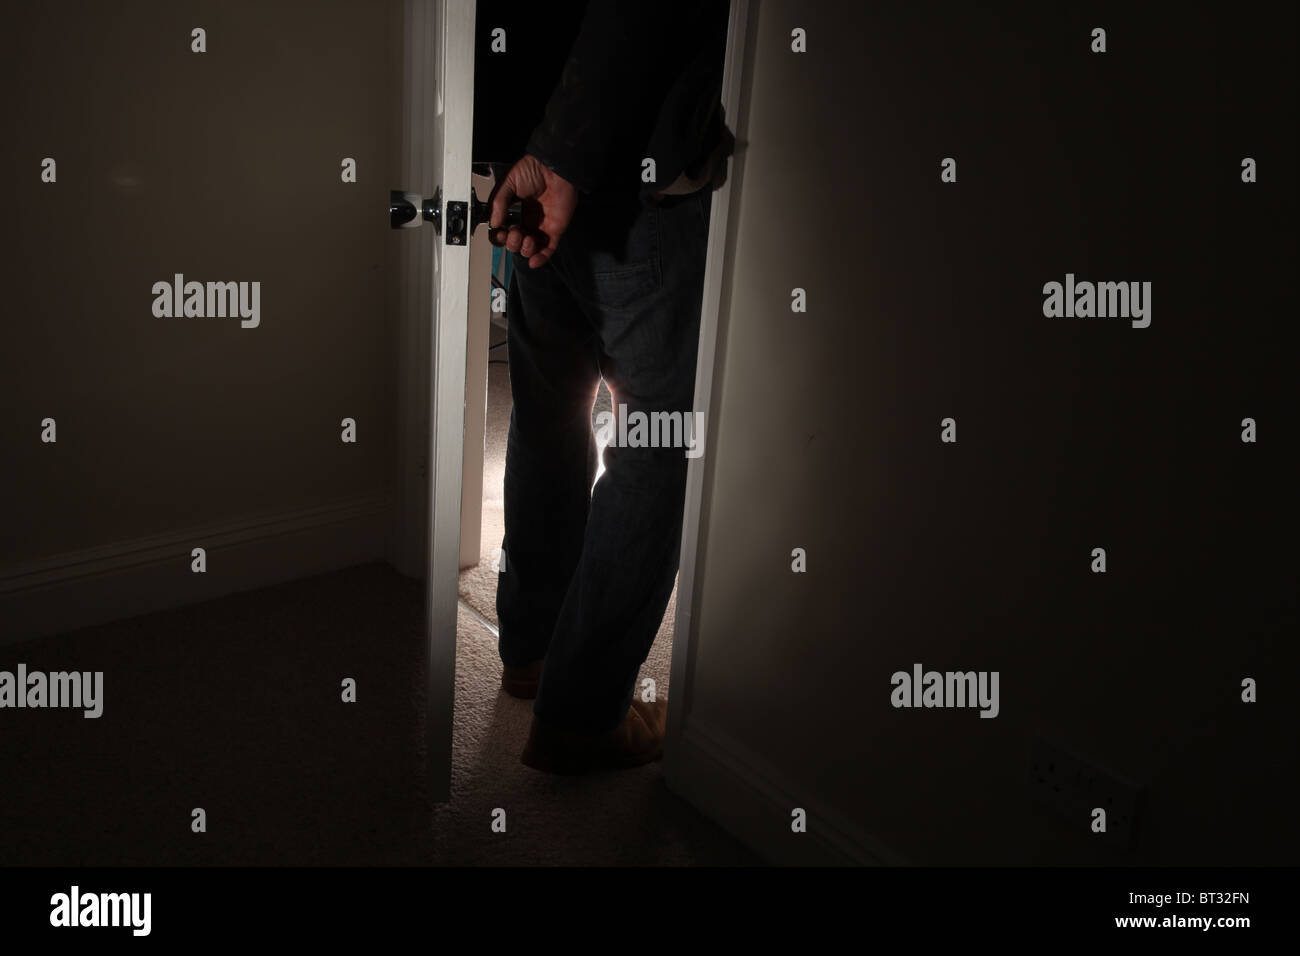 Man turning the handle opening a door entering a dark room Stock Photo